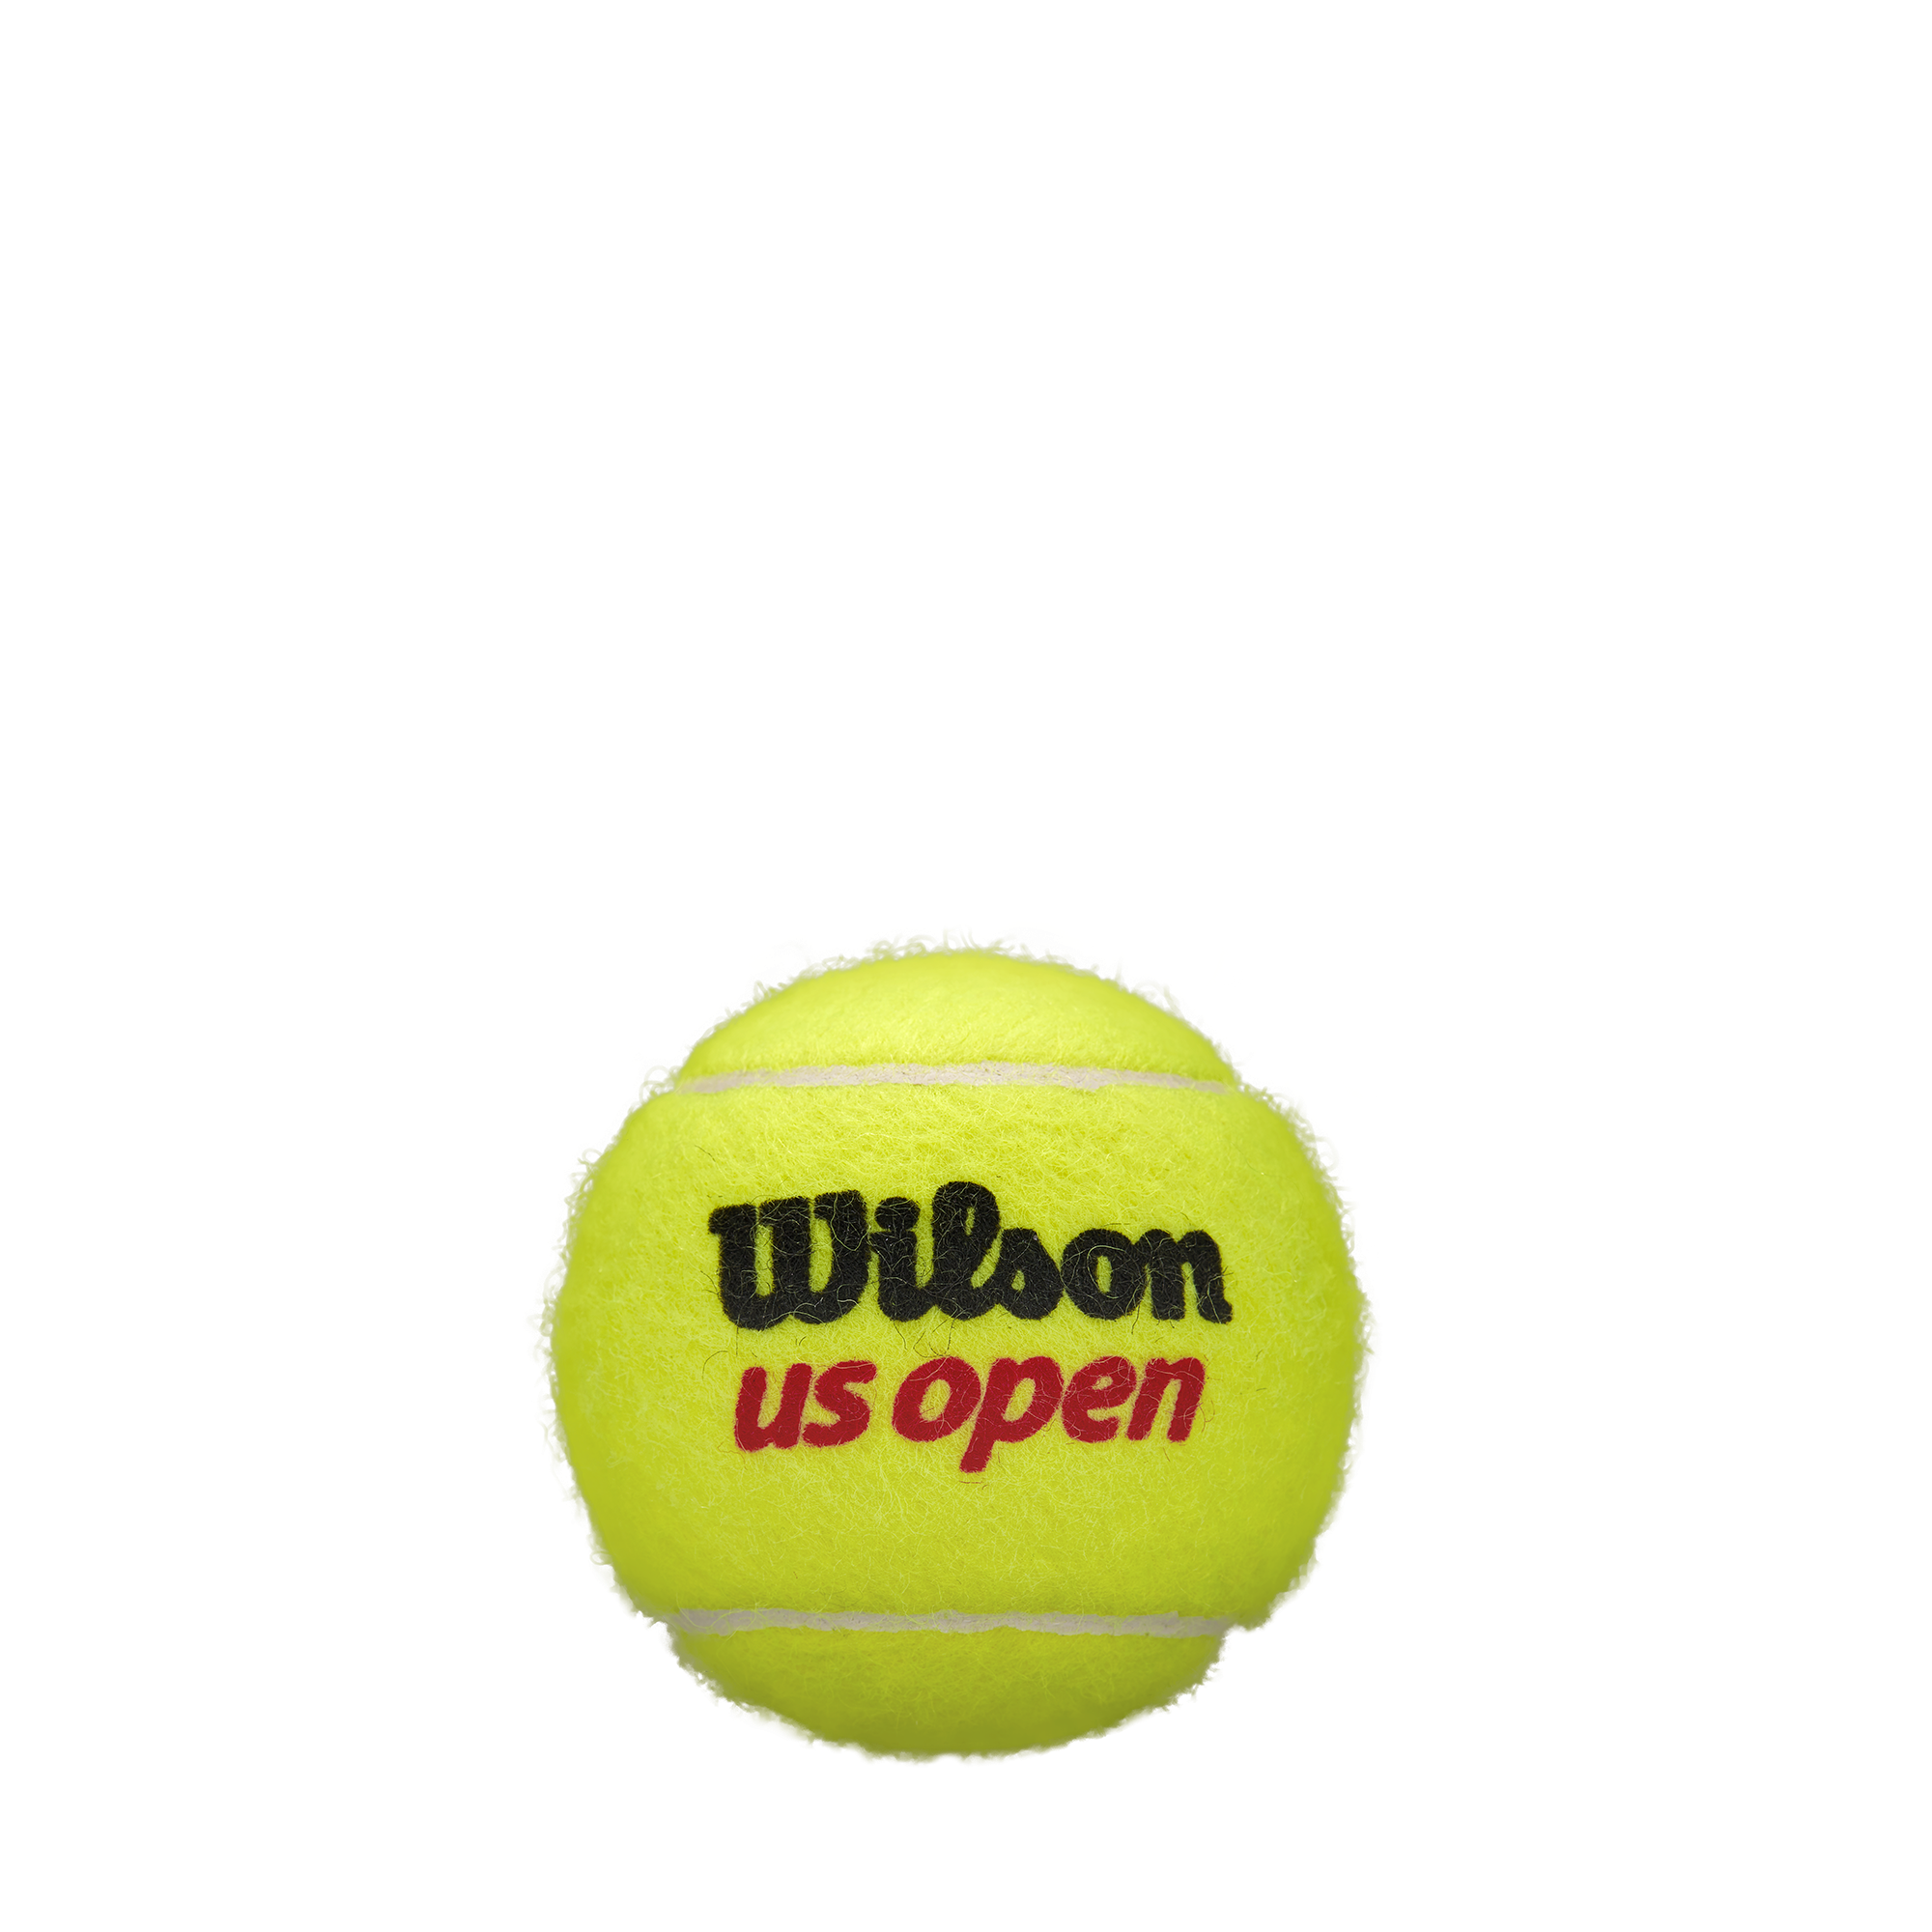 Wilson Us Open Extra Duty - Individual Can (3 Balls)